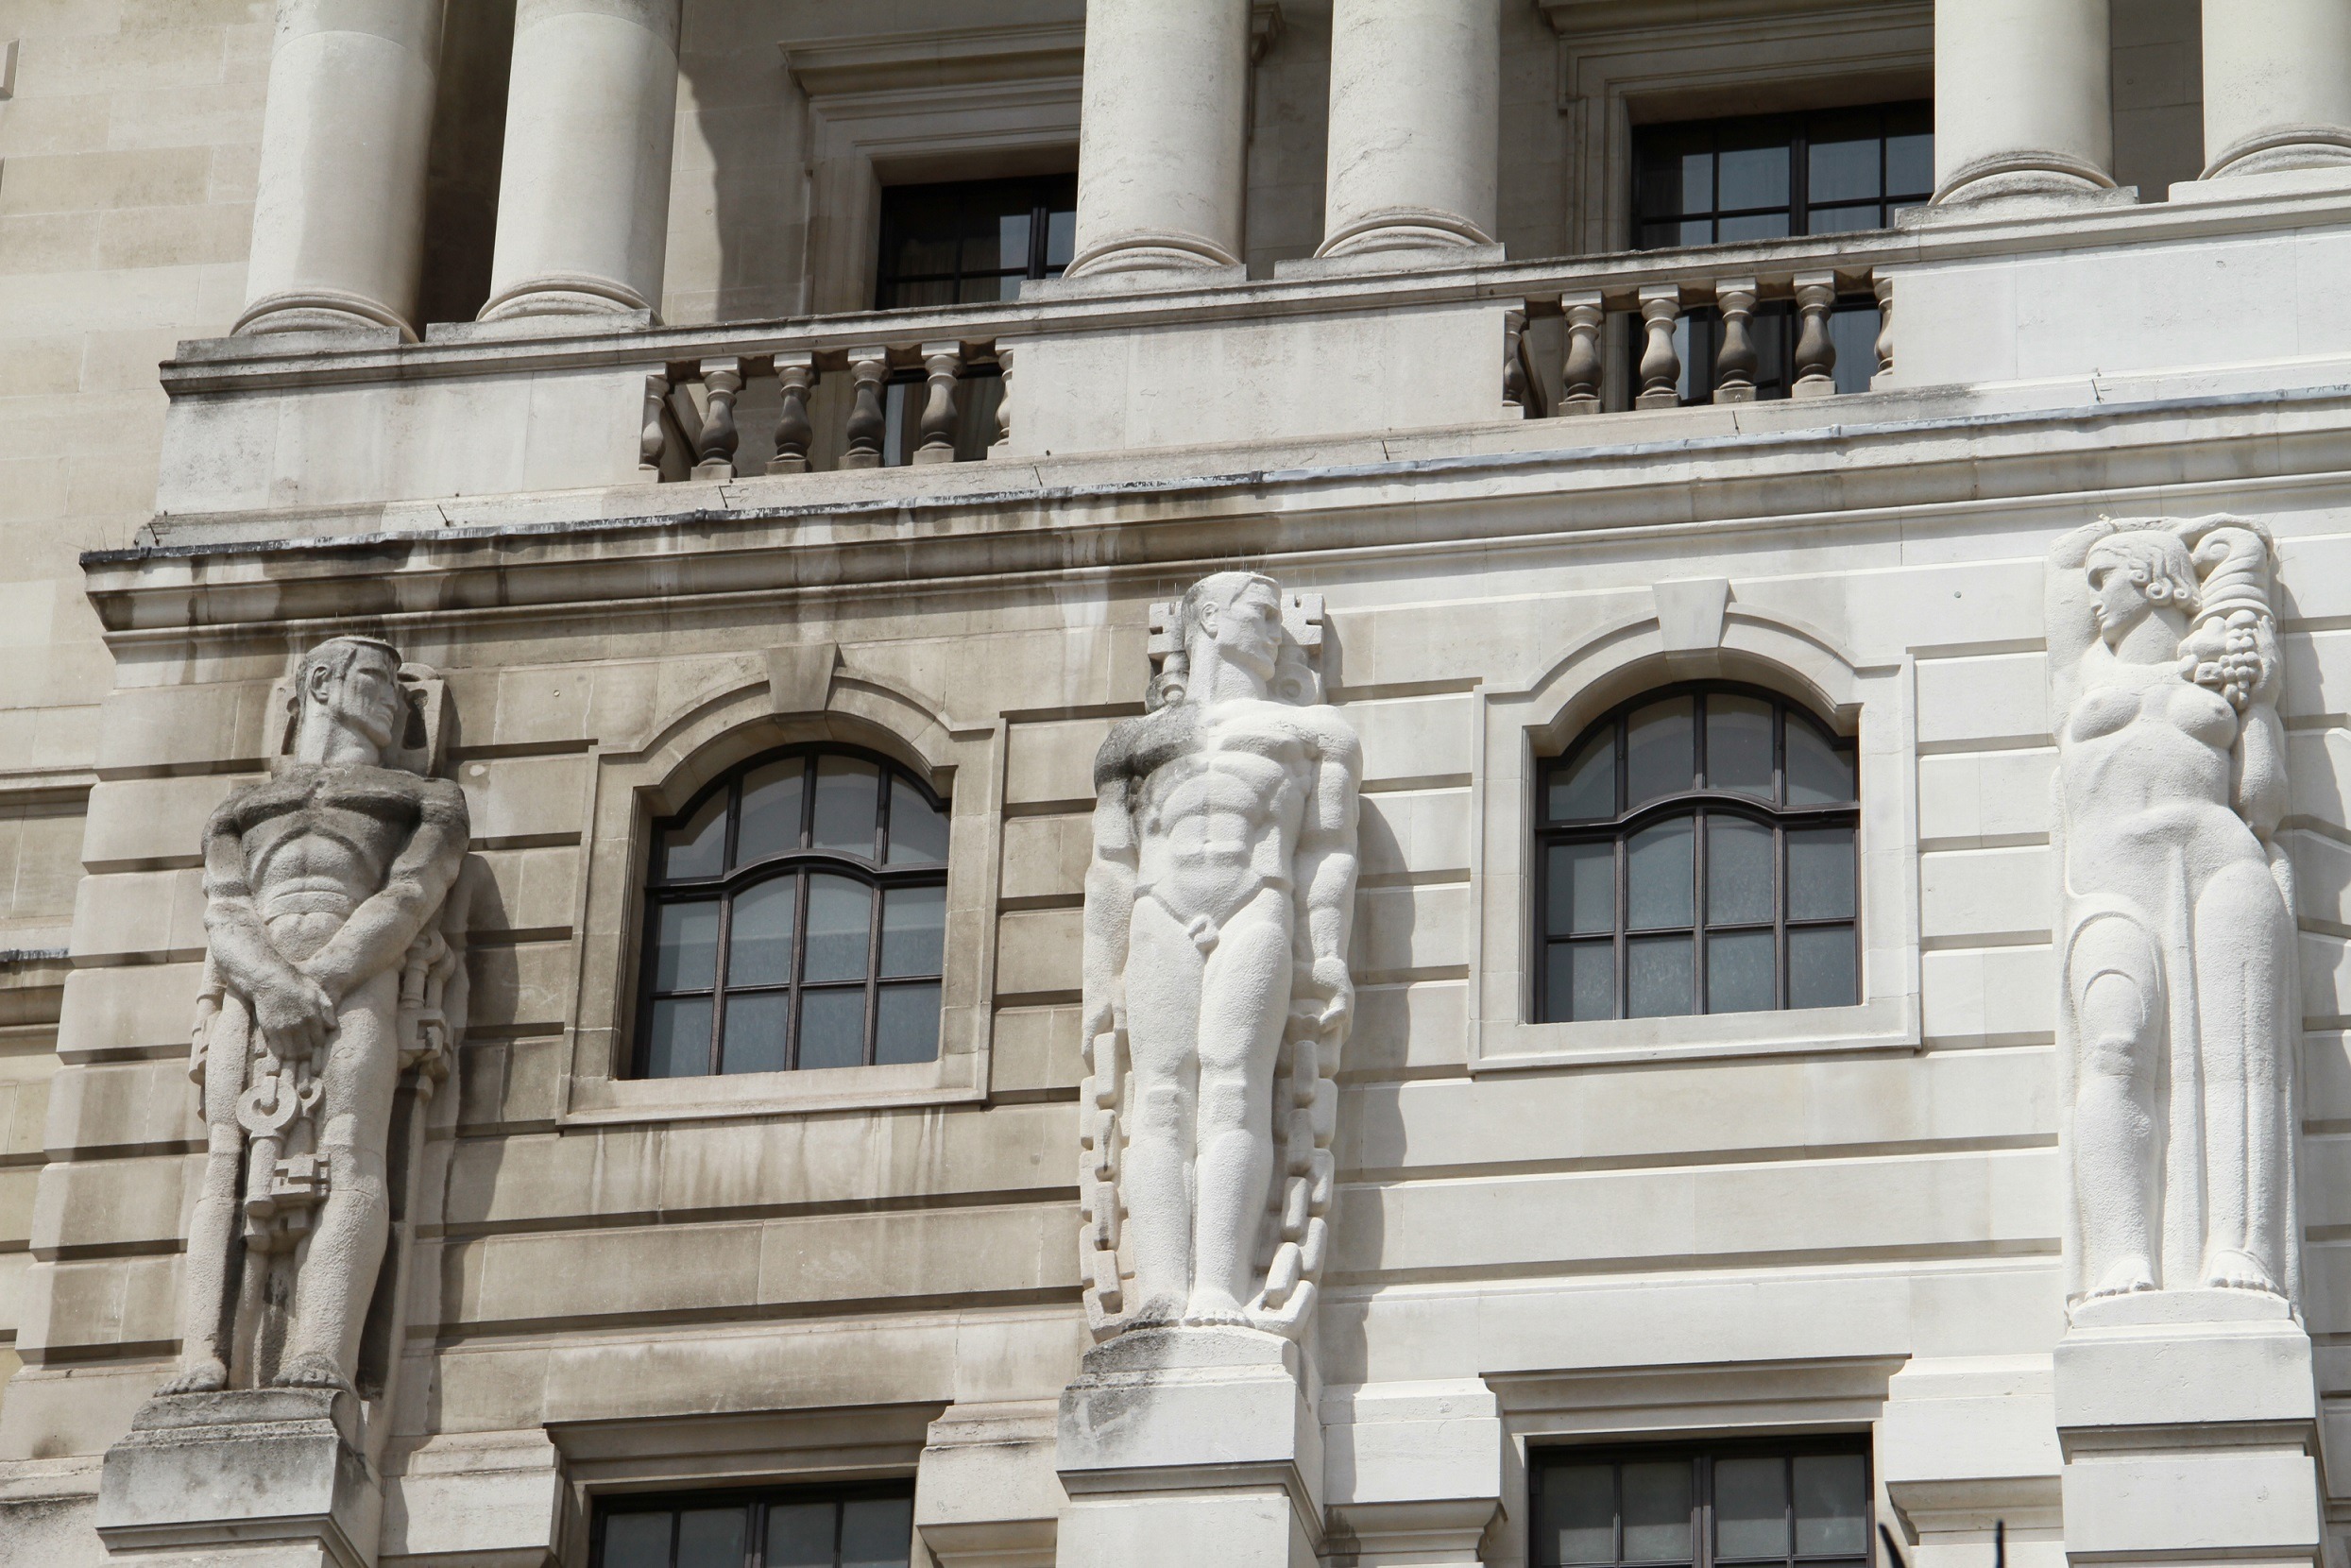 Bank of England cleaning and restoration | Thomann-Hanry®